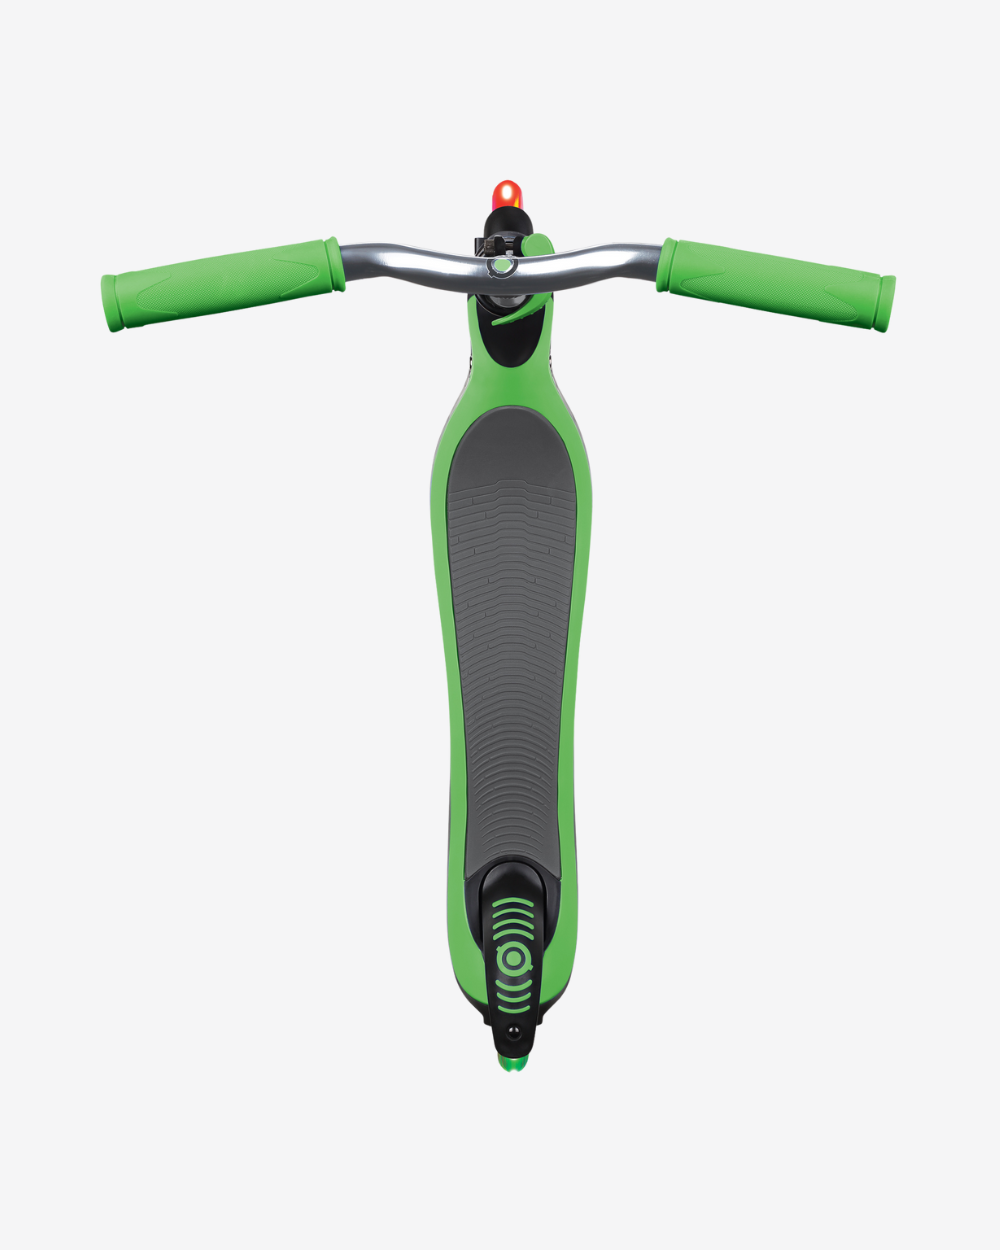 Globber Flow 125 Scooter With Lights | Black /Neon Green